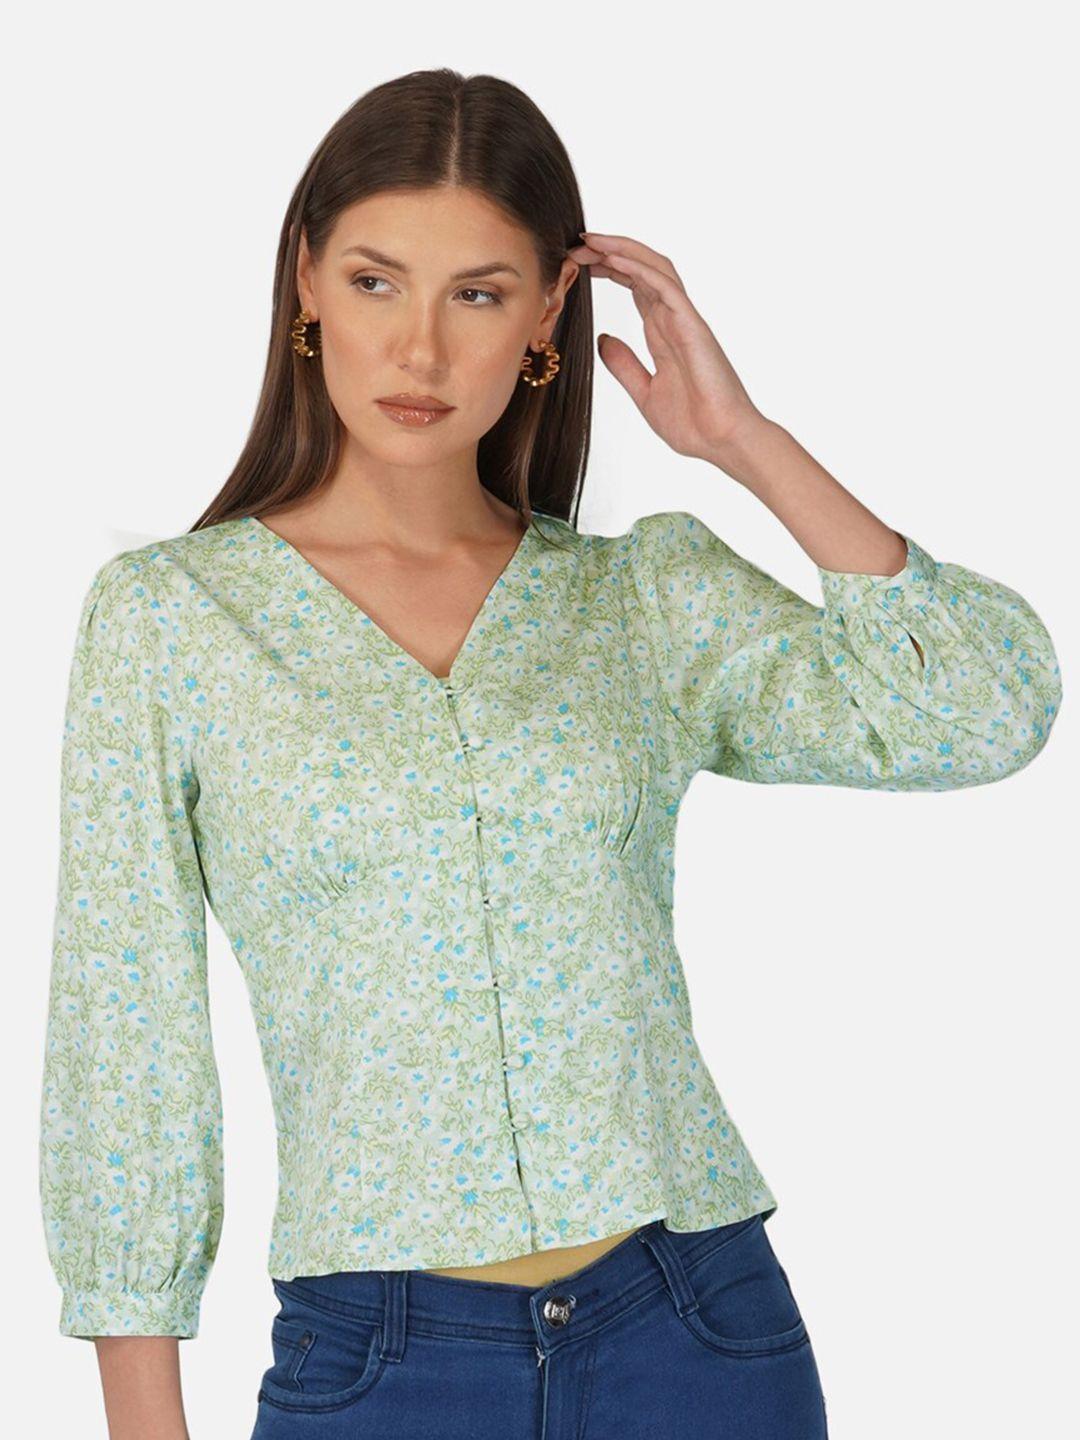 purys relaxed floral printed puff sleeves shirt style top